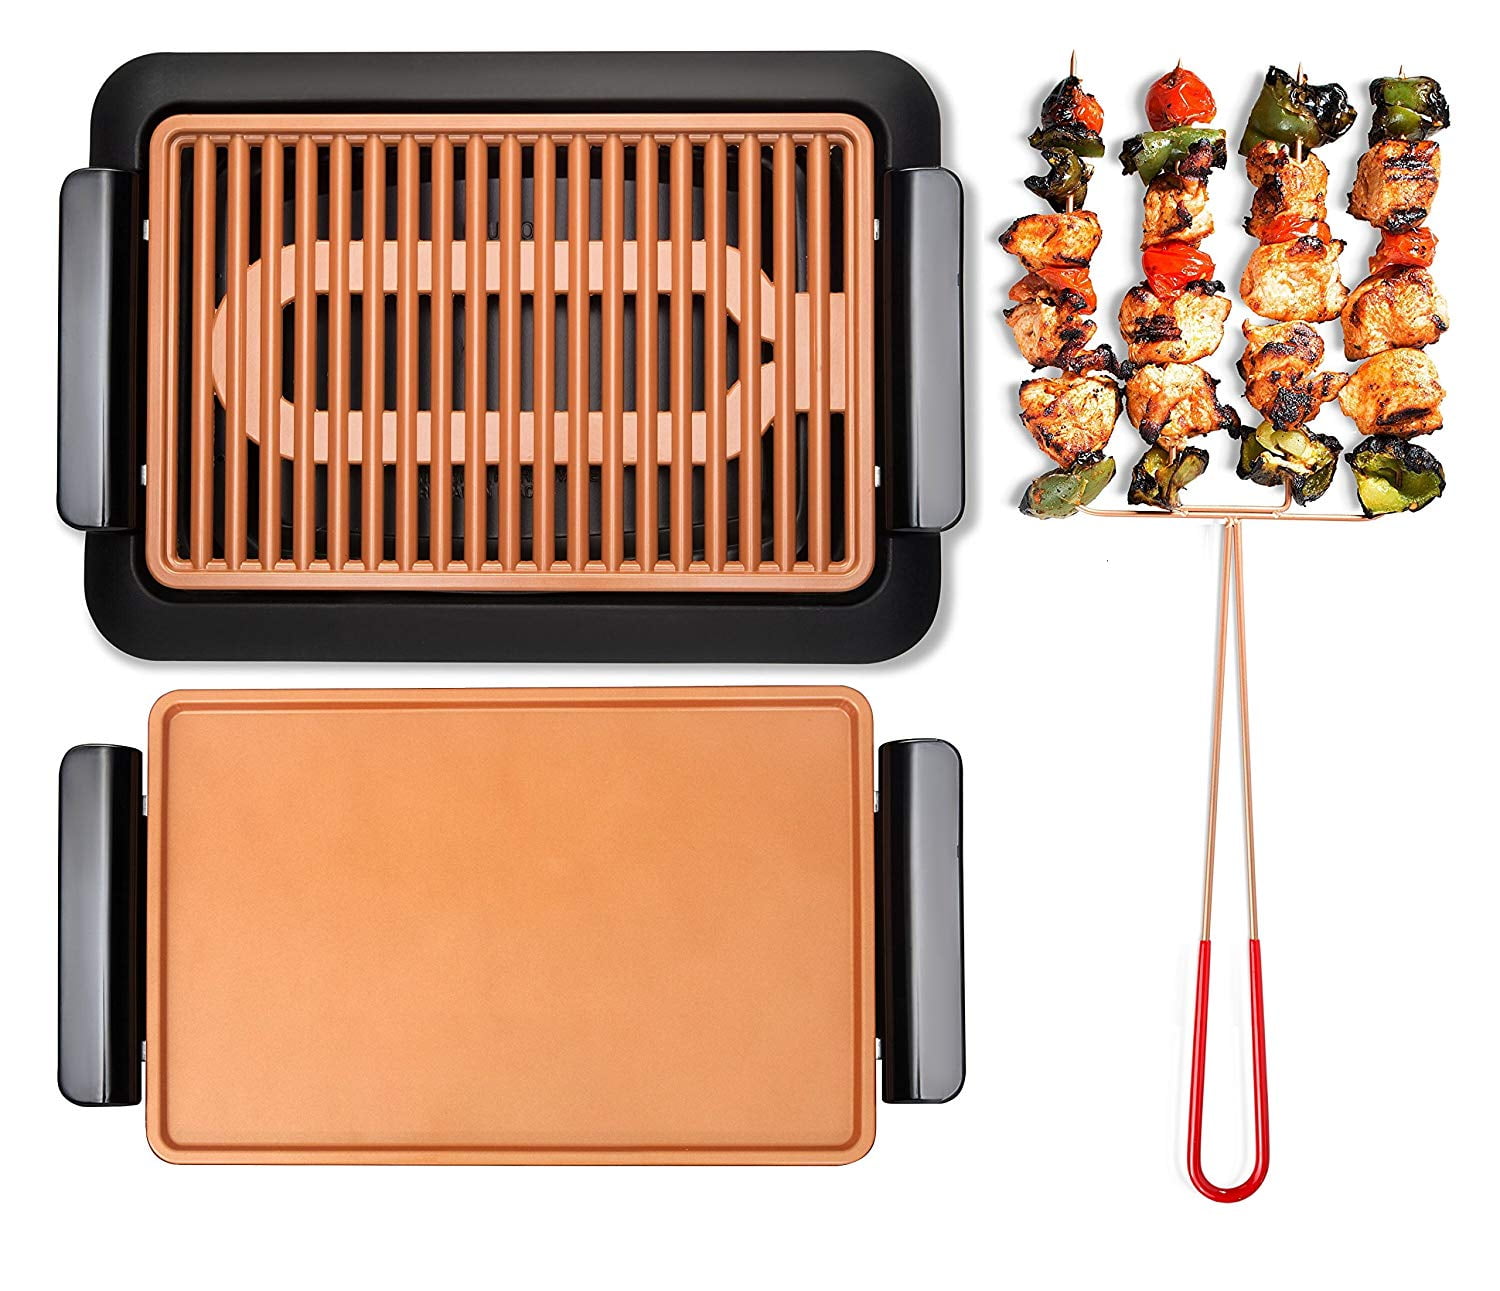 Smokeless Electric Grill with Interchangeable Griddle Surface Nonstick Multipurpose Indoor BBQ & Surface Grill As Seen on TV 